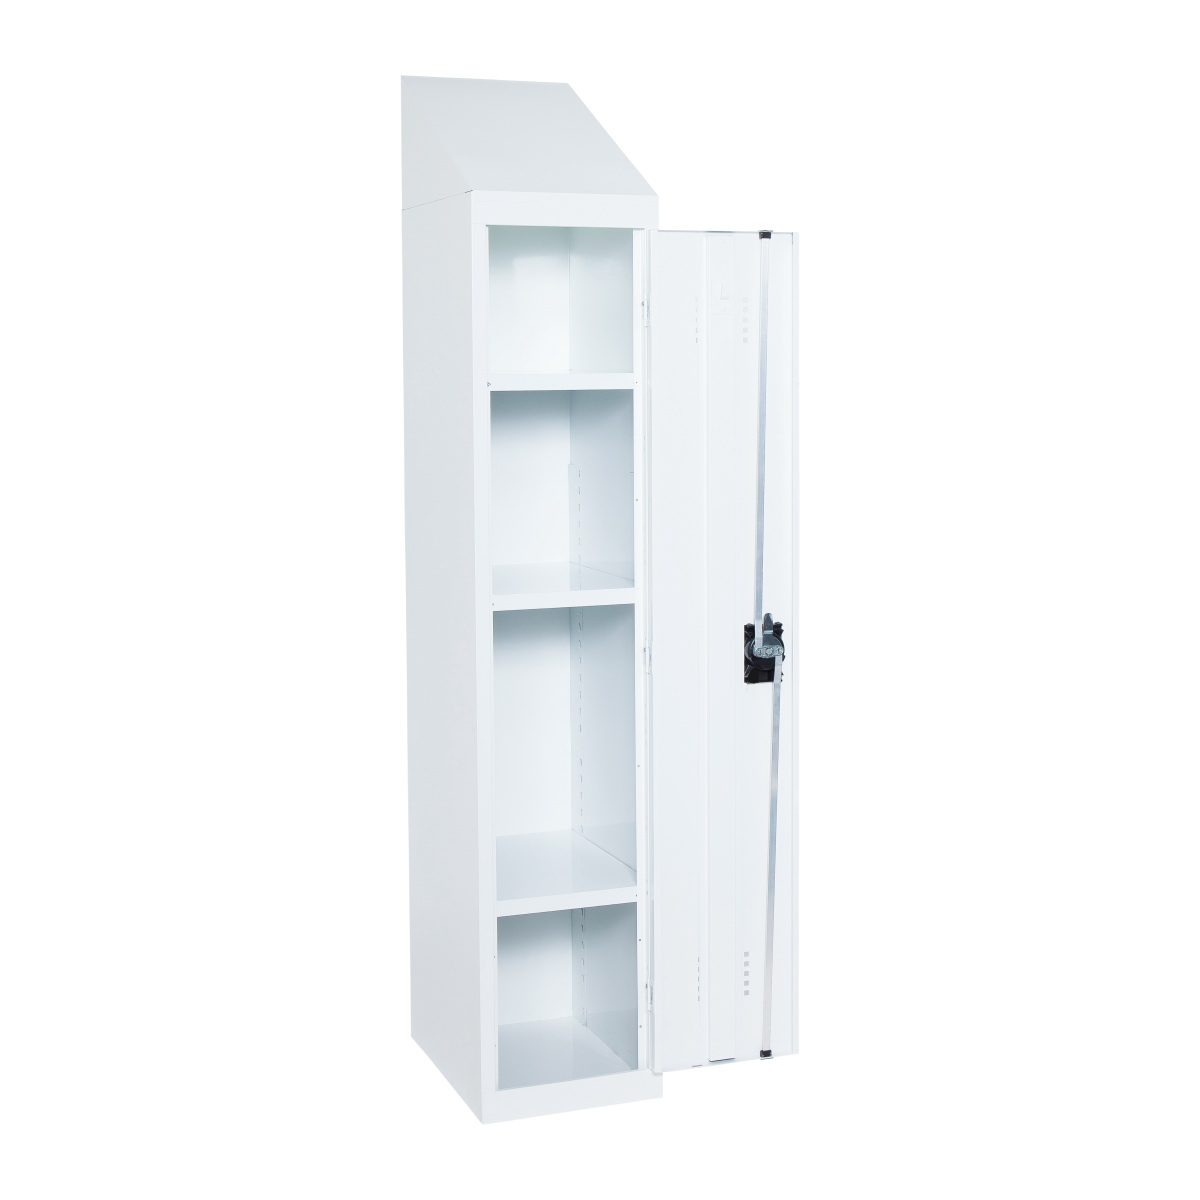 Statewide School Locker with sloping Top